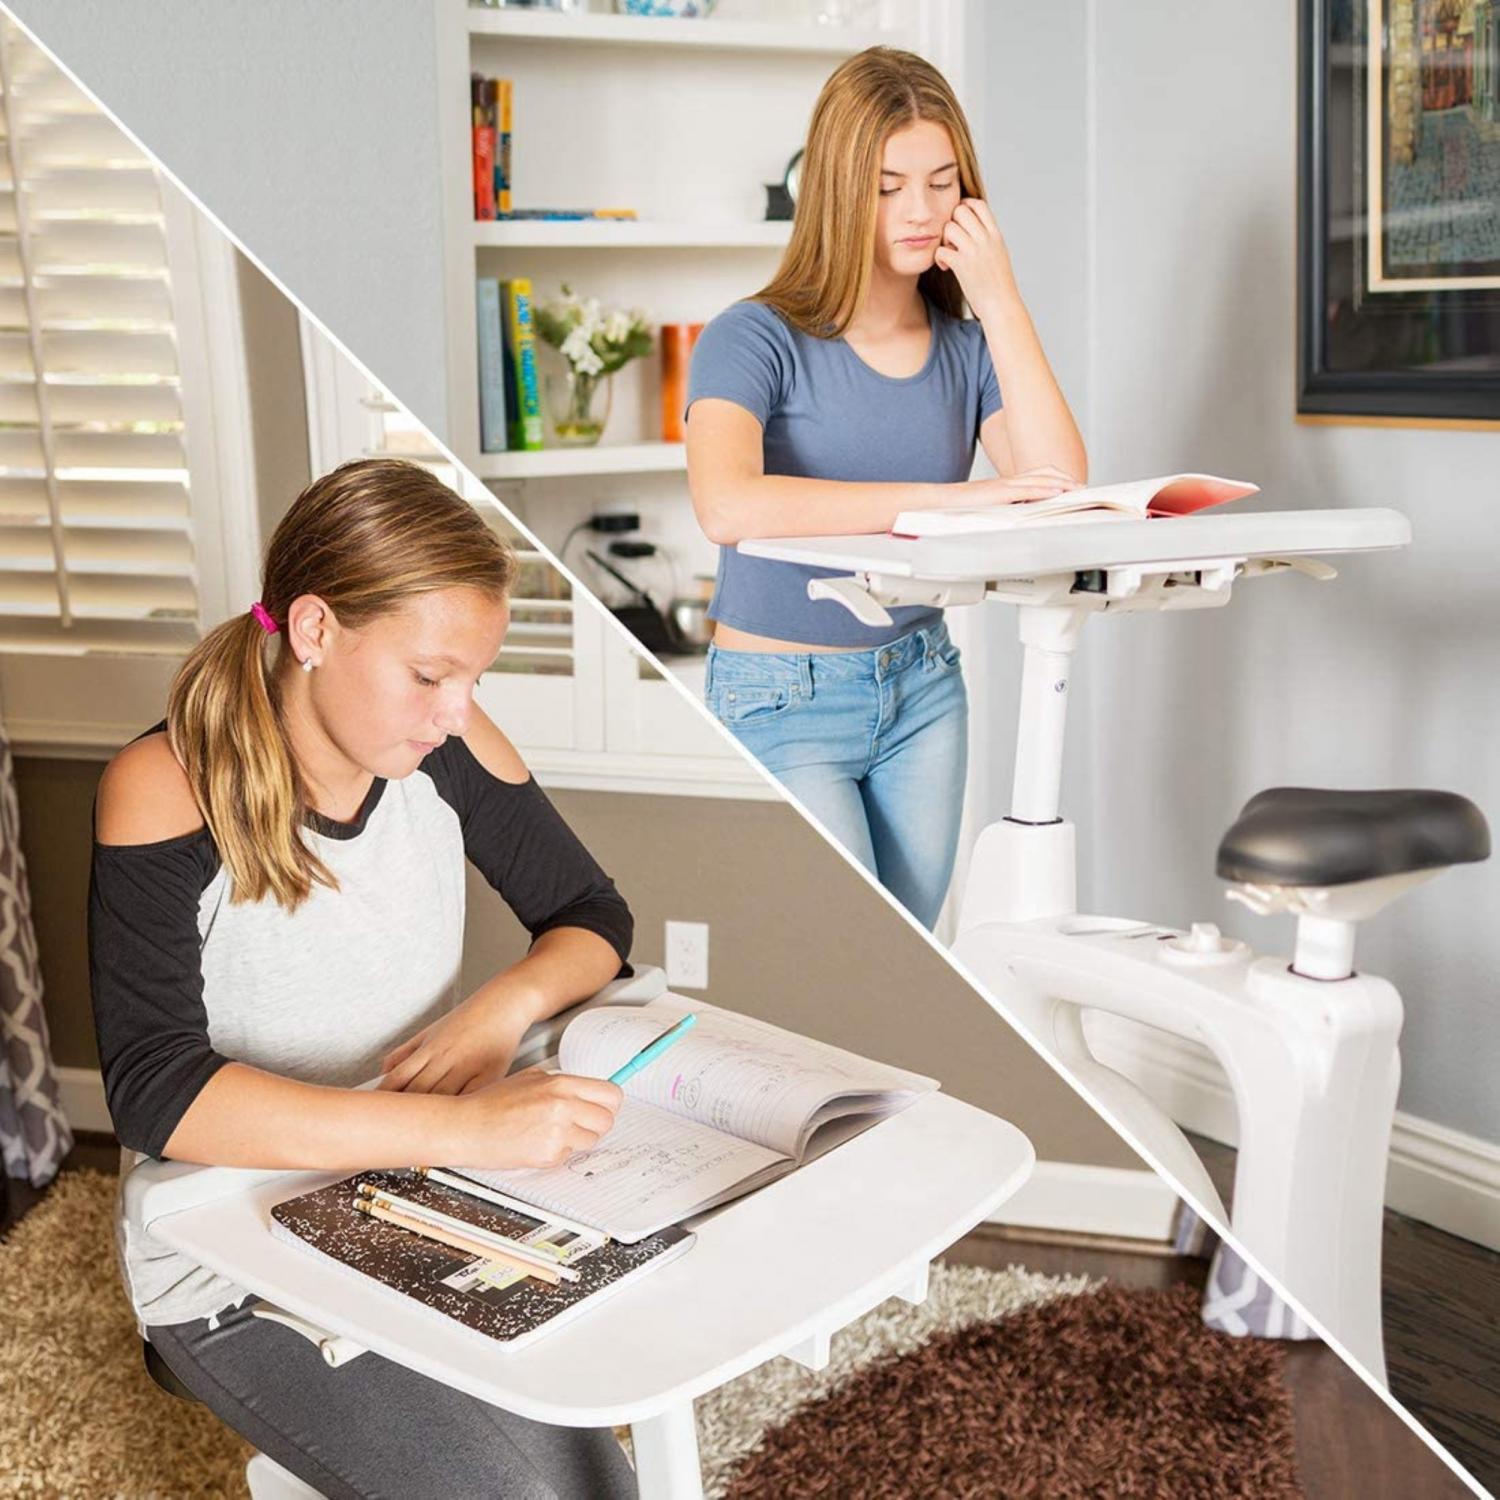 A grey shirt wearing girl sitting on a white Exercise Bike Desk; a black and white shirt wearing girl sitting on a white Exercise Bike Desk